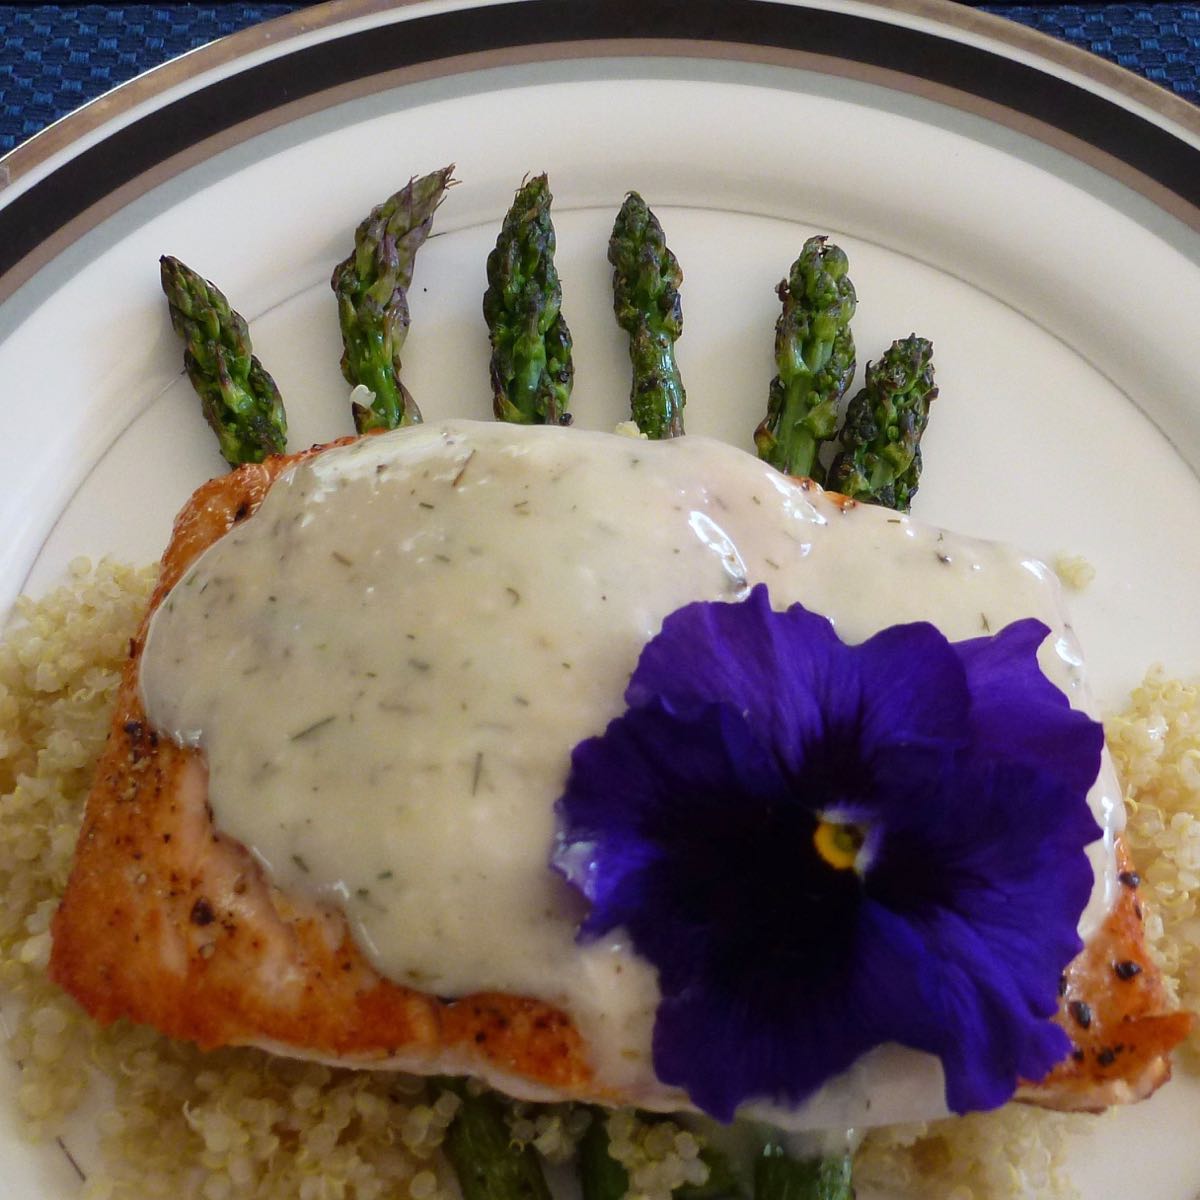 Grilled Salmon with West Coast Dill Barbecue Sauce on top of cooked asparagus with a purple pansy garnish.